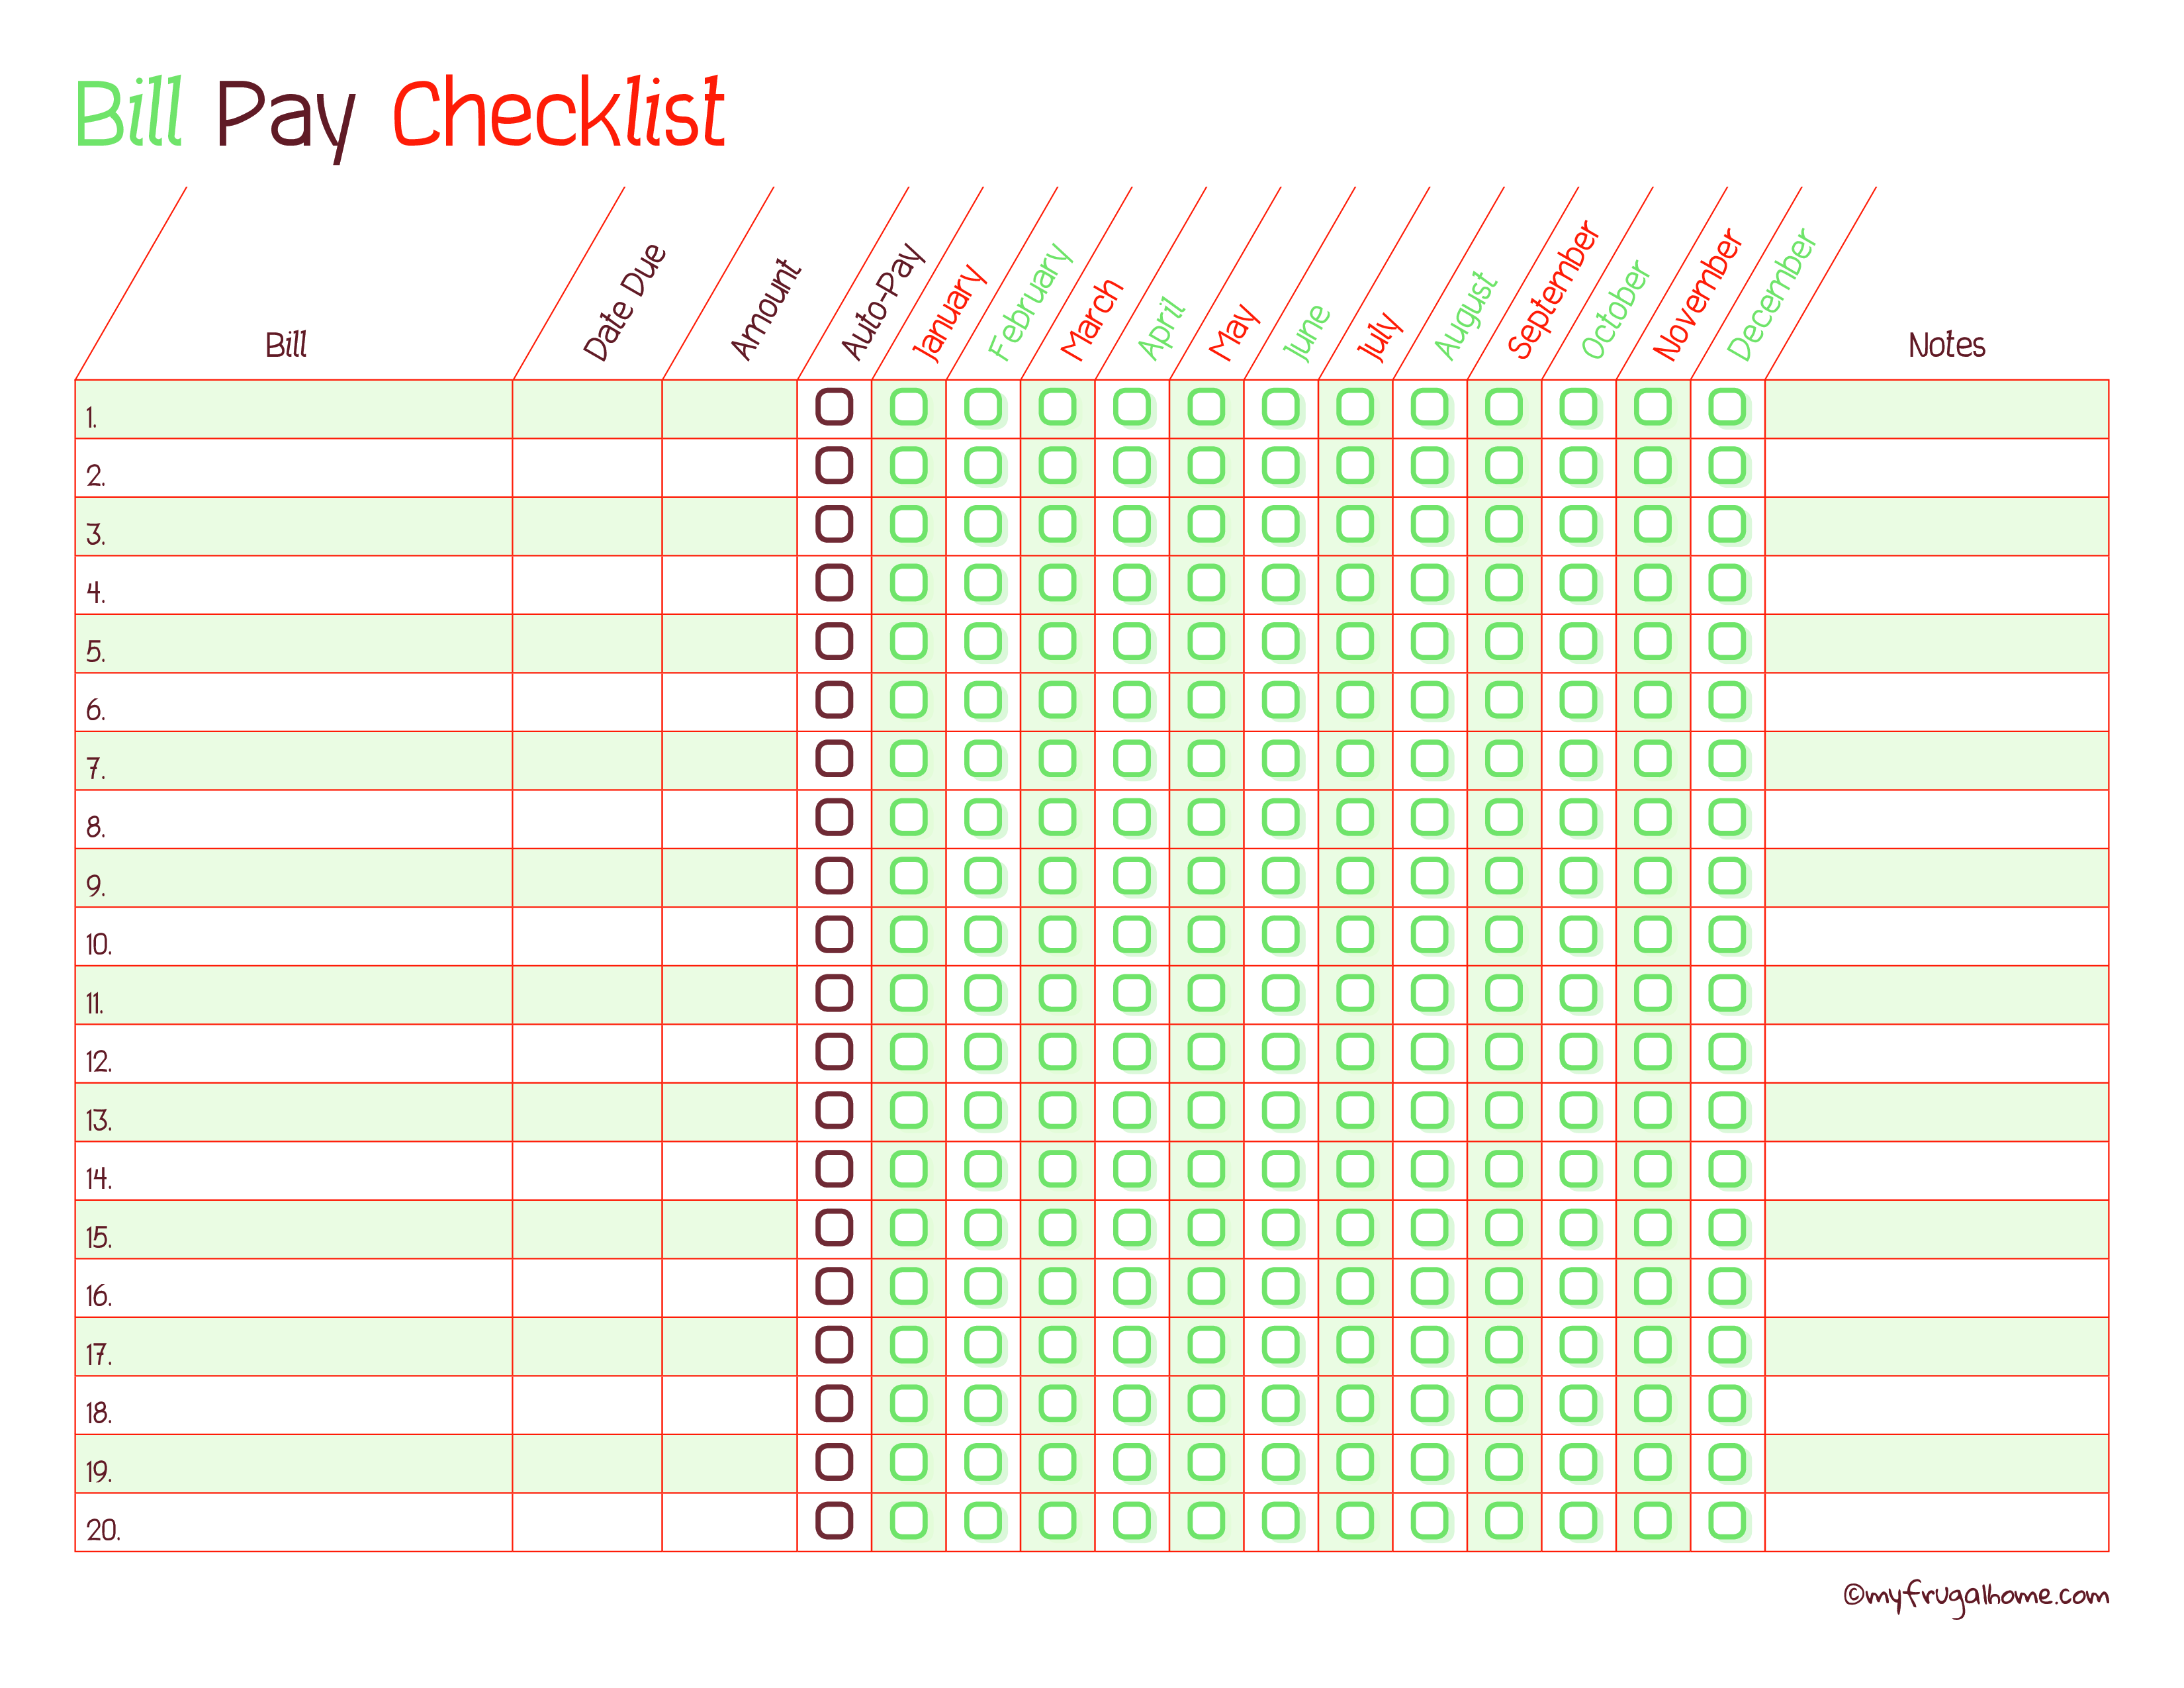 Bill Payment Checklist Templates at